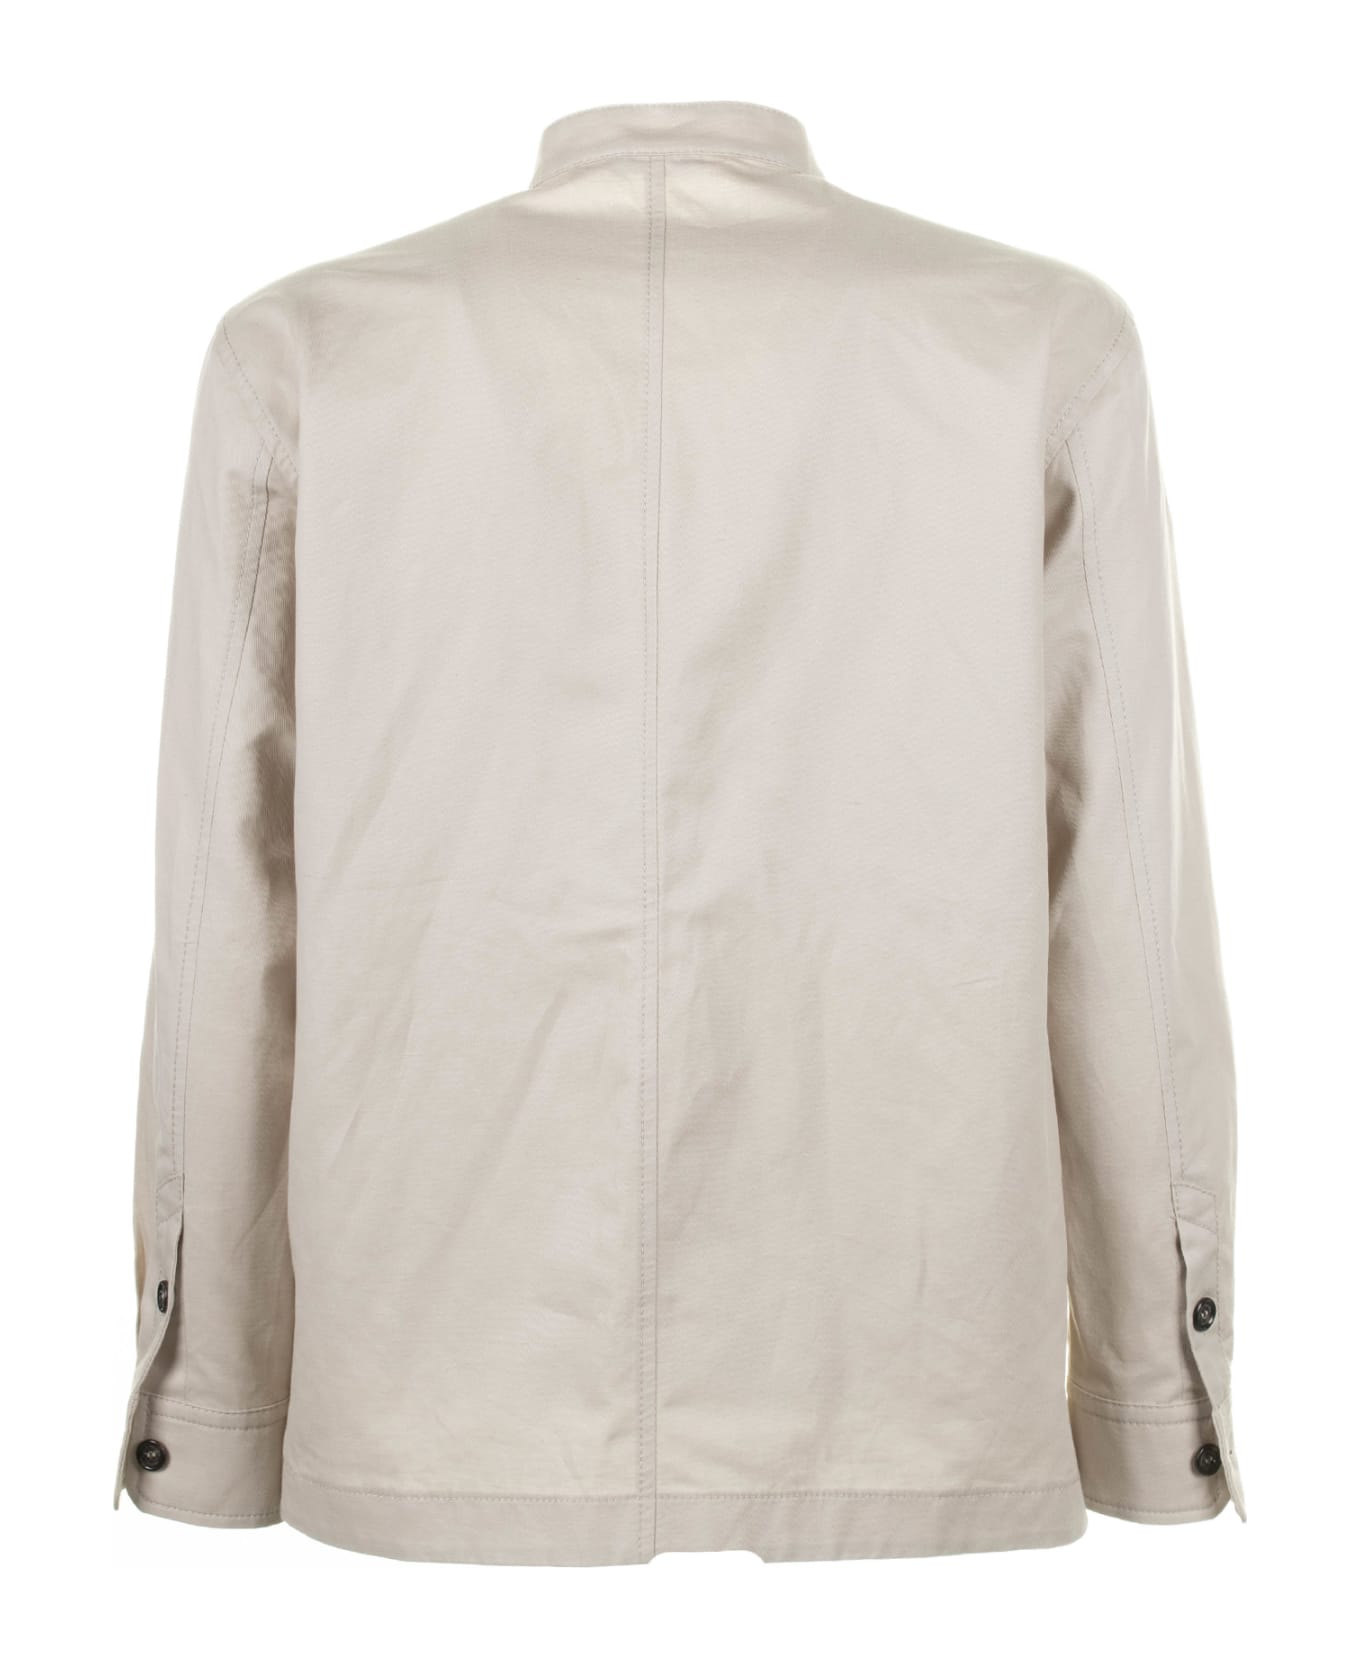 Paolo Pecora Oversized Shirt With Pockets - GHIACCIO